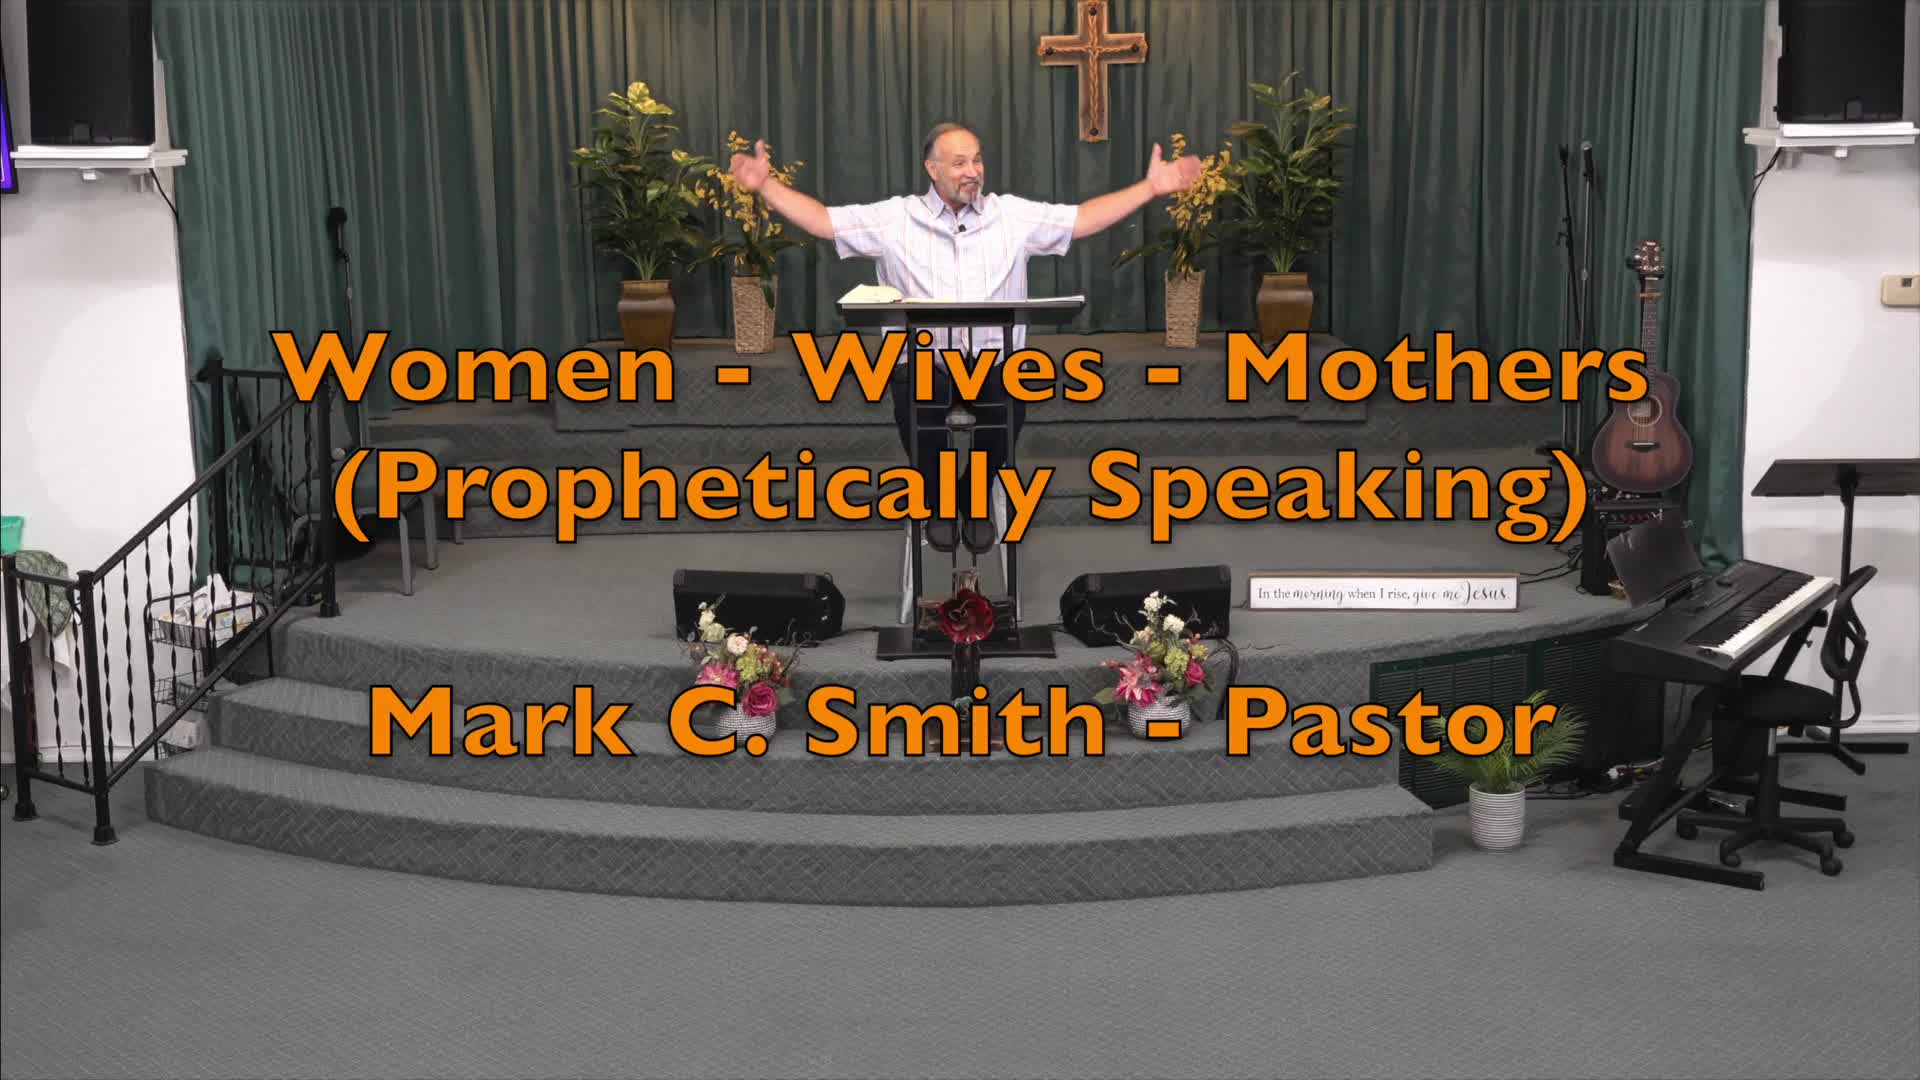 Women Wives Mothers - Prophetically Speaking